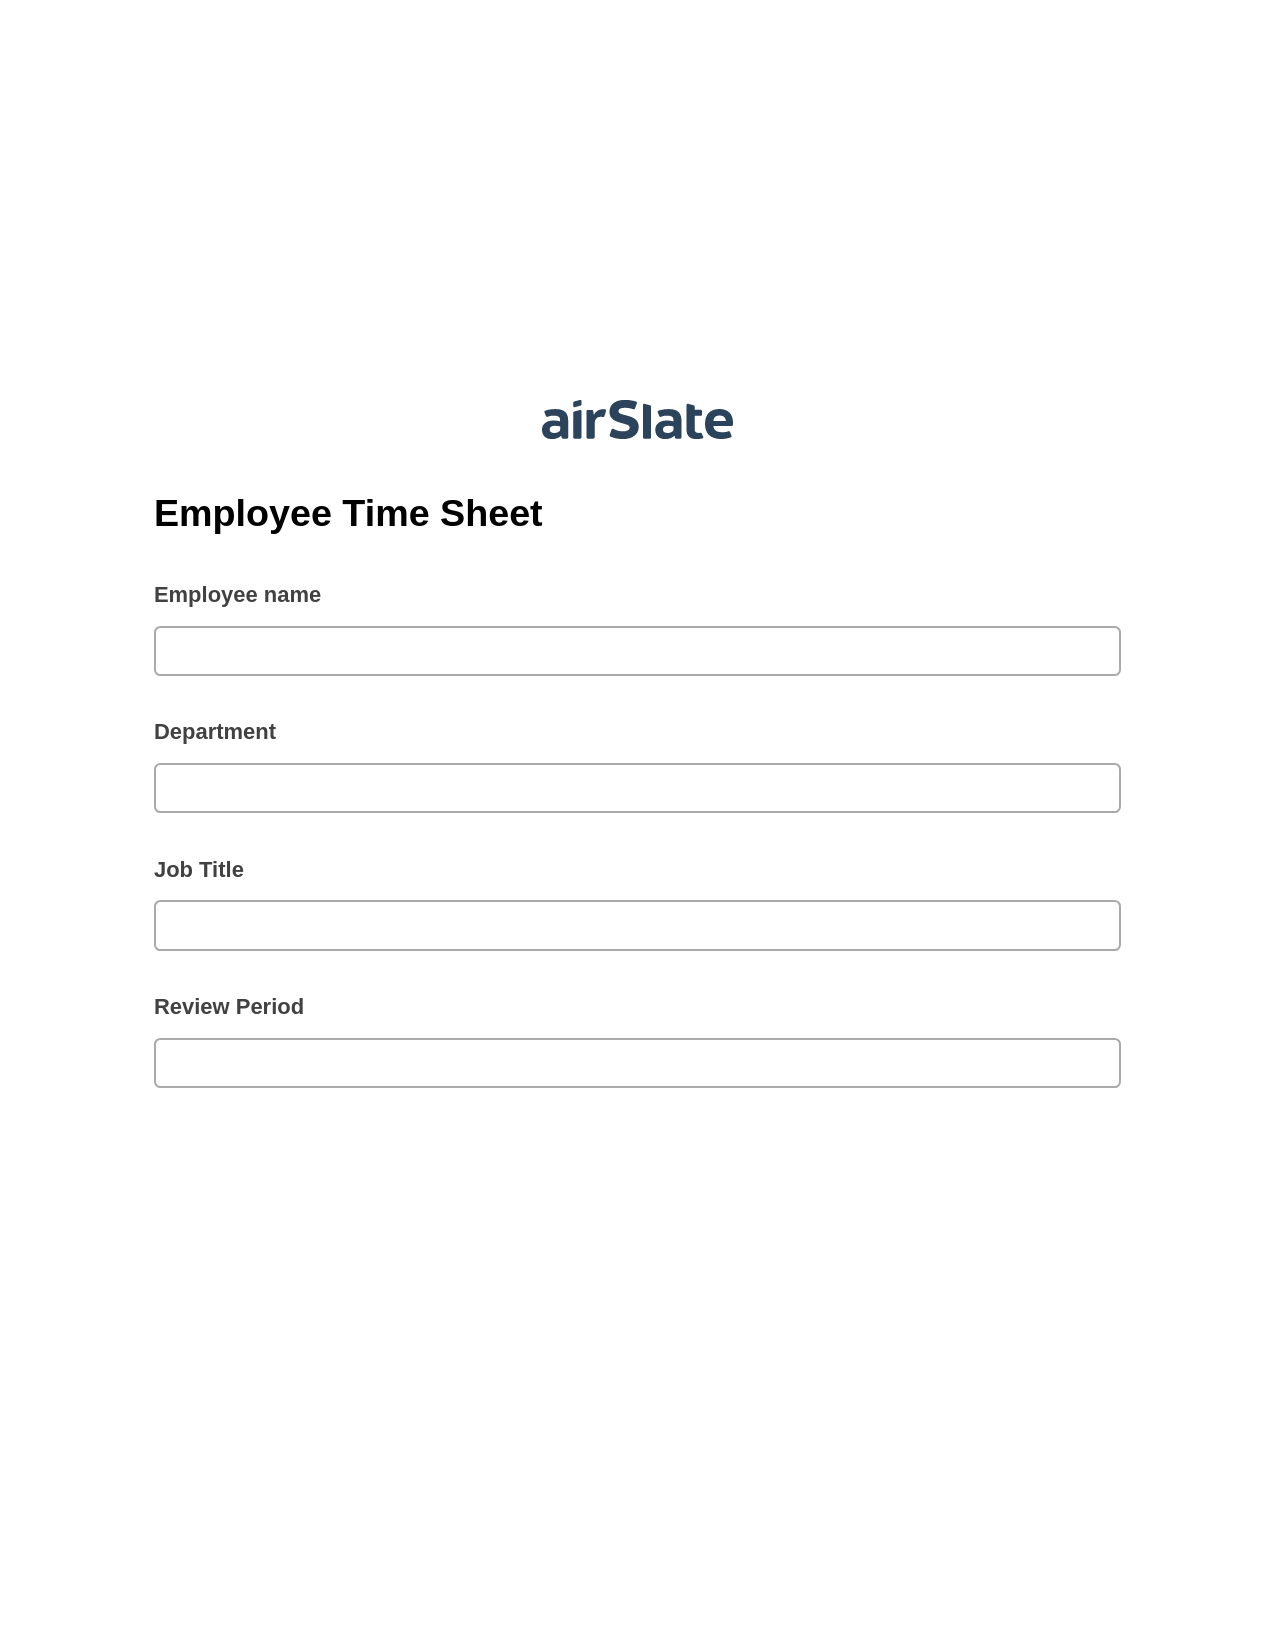 Employee Time Sheet Pre-fill Document Bot, Update Audit Trail Bot, Archive to Dropbox Bot